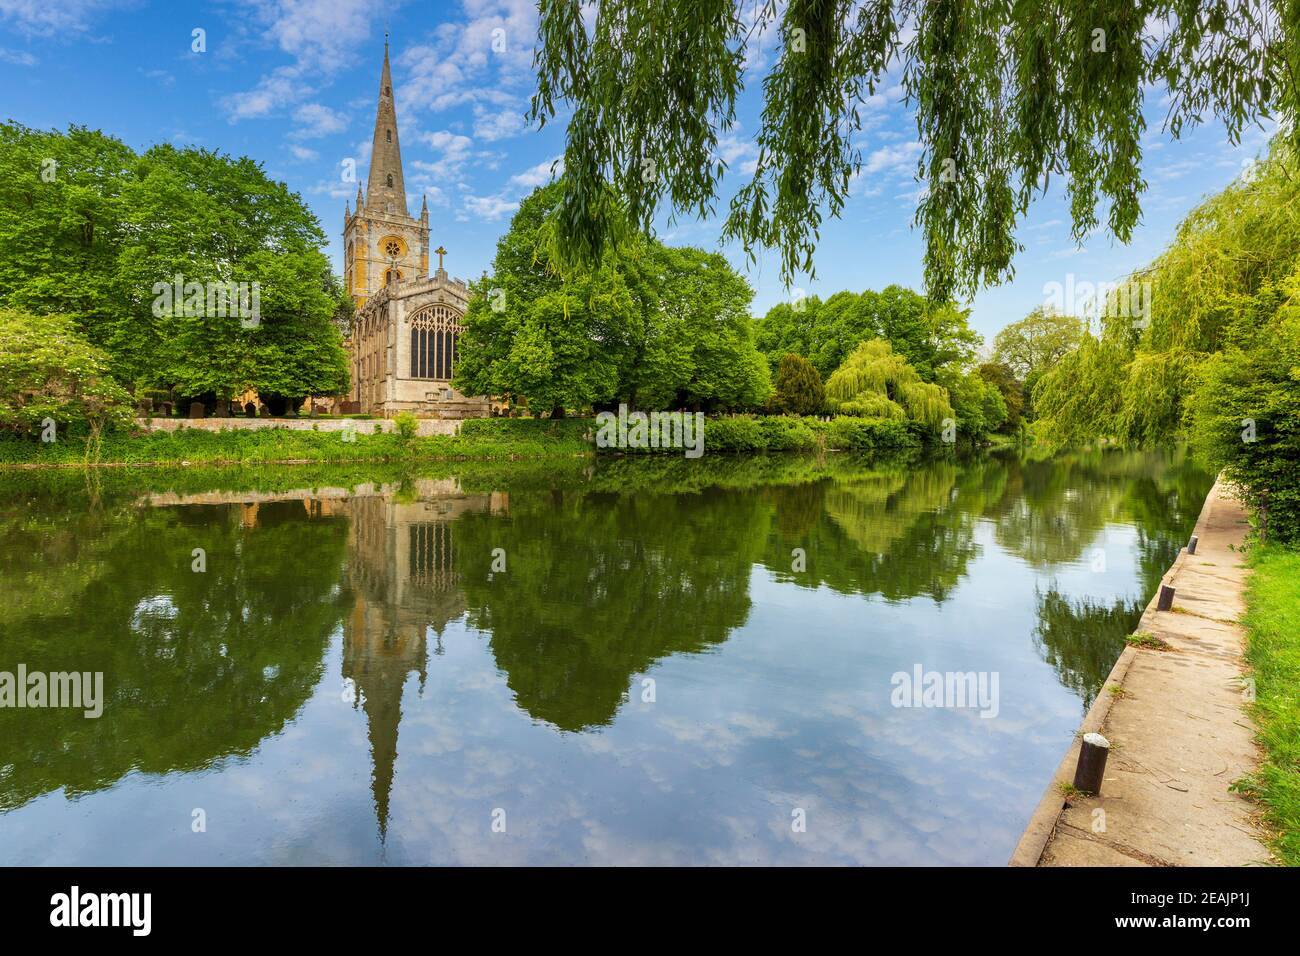 Holy Trinity church reflected in the River Avon at Stratford Upon Avon, England Stock Photo